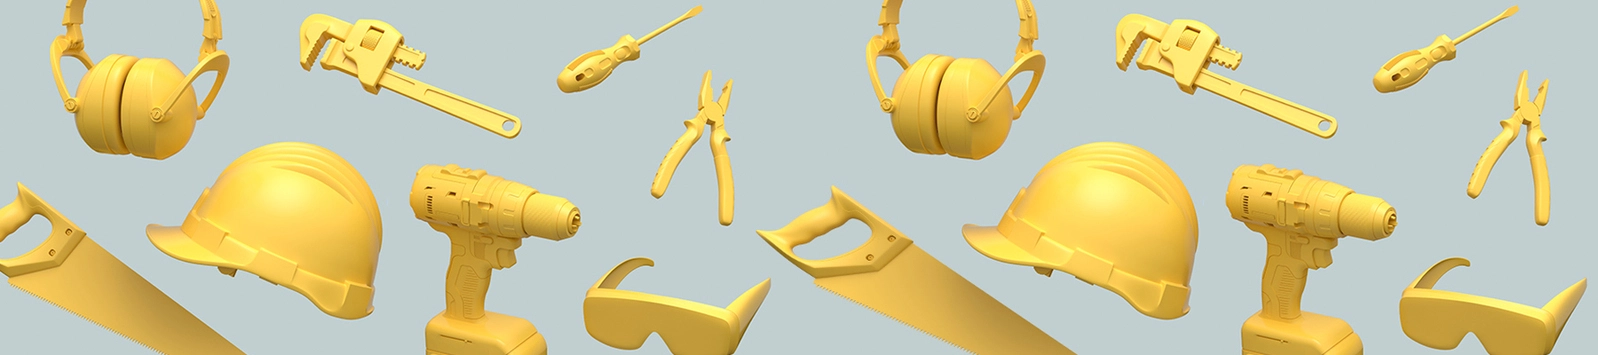 Flying view of yellow construction tools